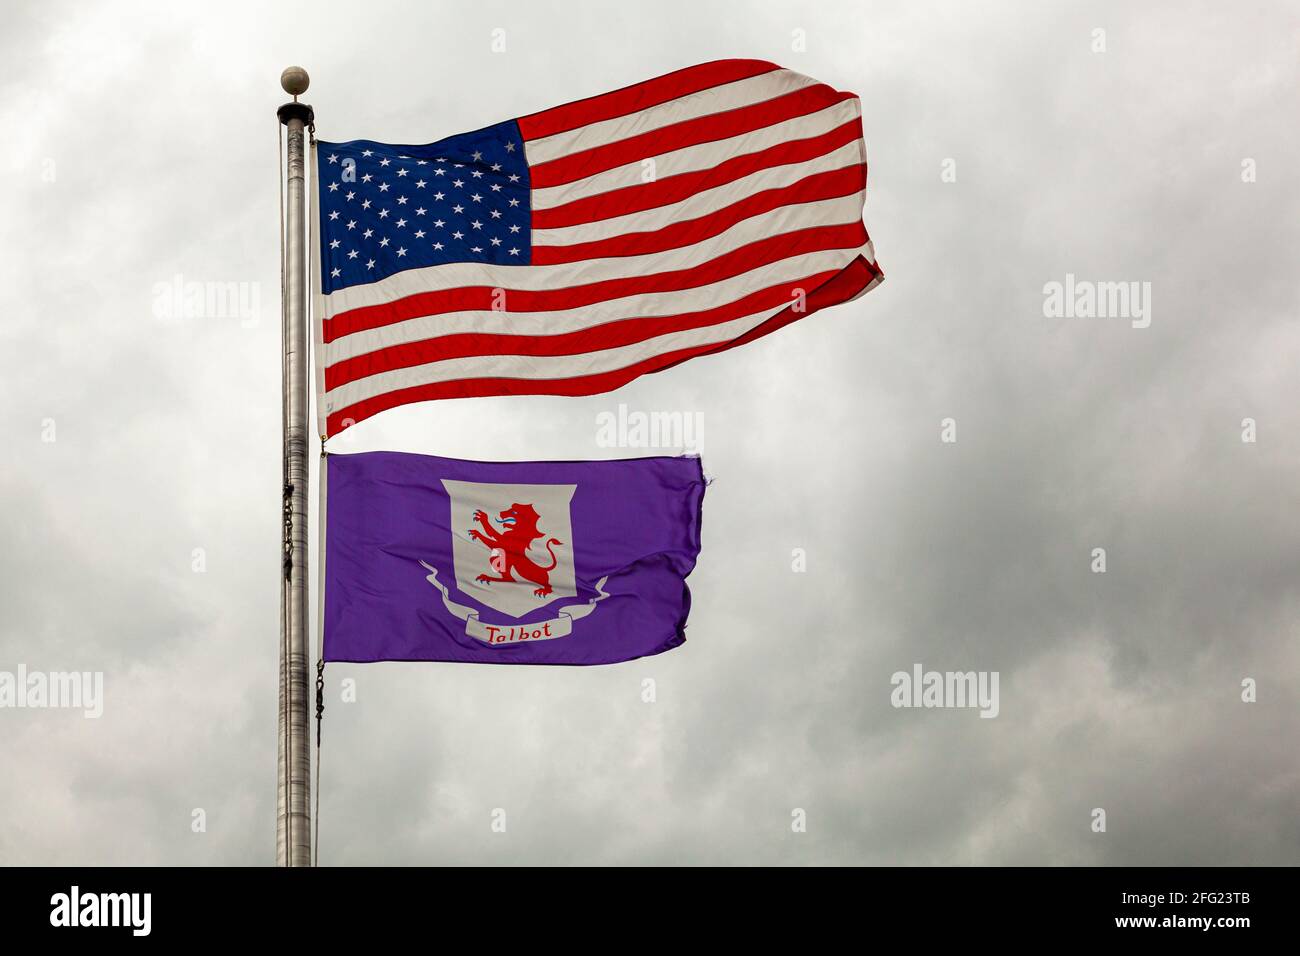 Flags of the United States of America and Talbot County, Maryland are flying together on a flag post against cloudy sky. Isolated image with copy spac Stock Photo